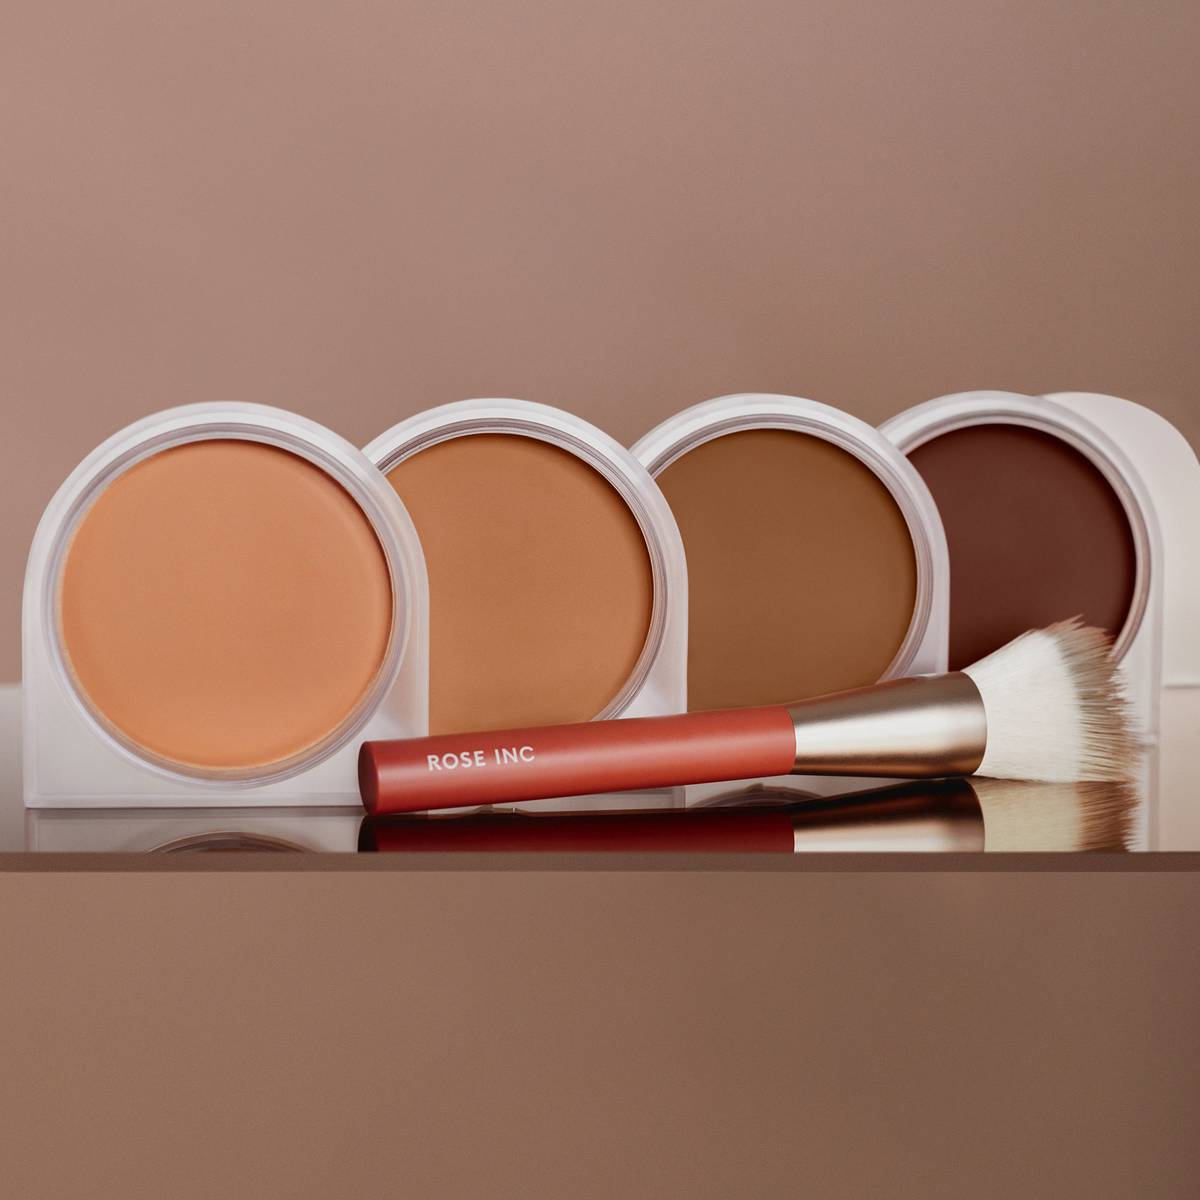 Image featuring each shade of the Solar Infusion Soft-Focus Cream Bronzer lined up in a row with the Number 5 Bronzer Brush laid across the front. 